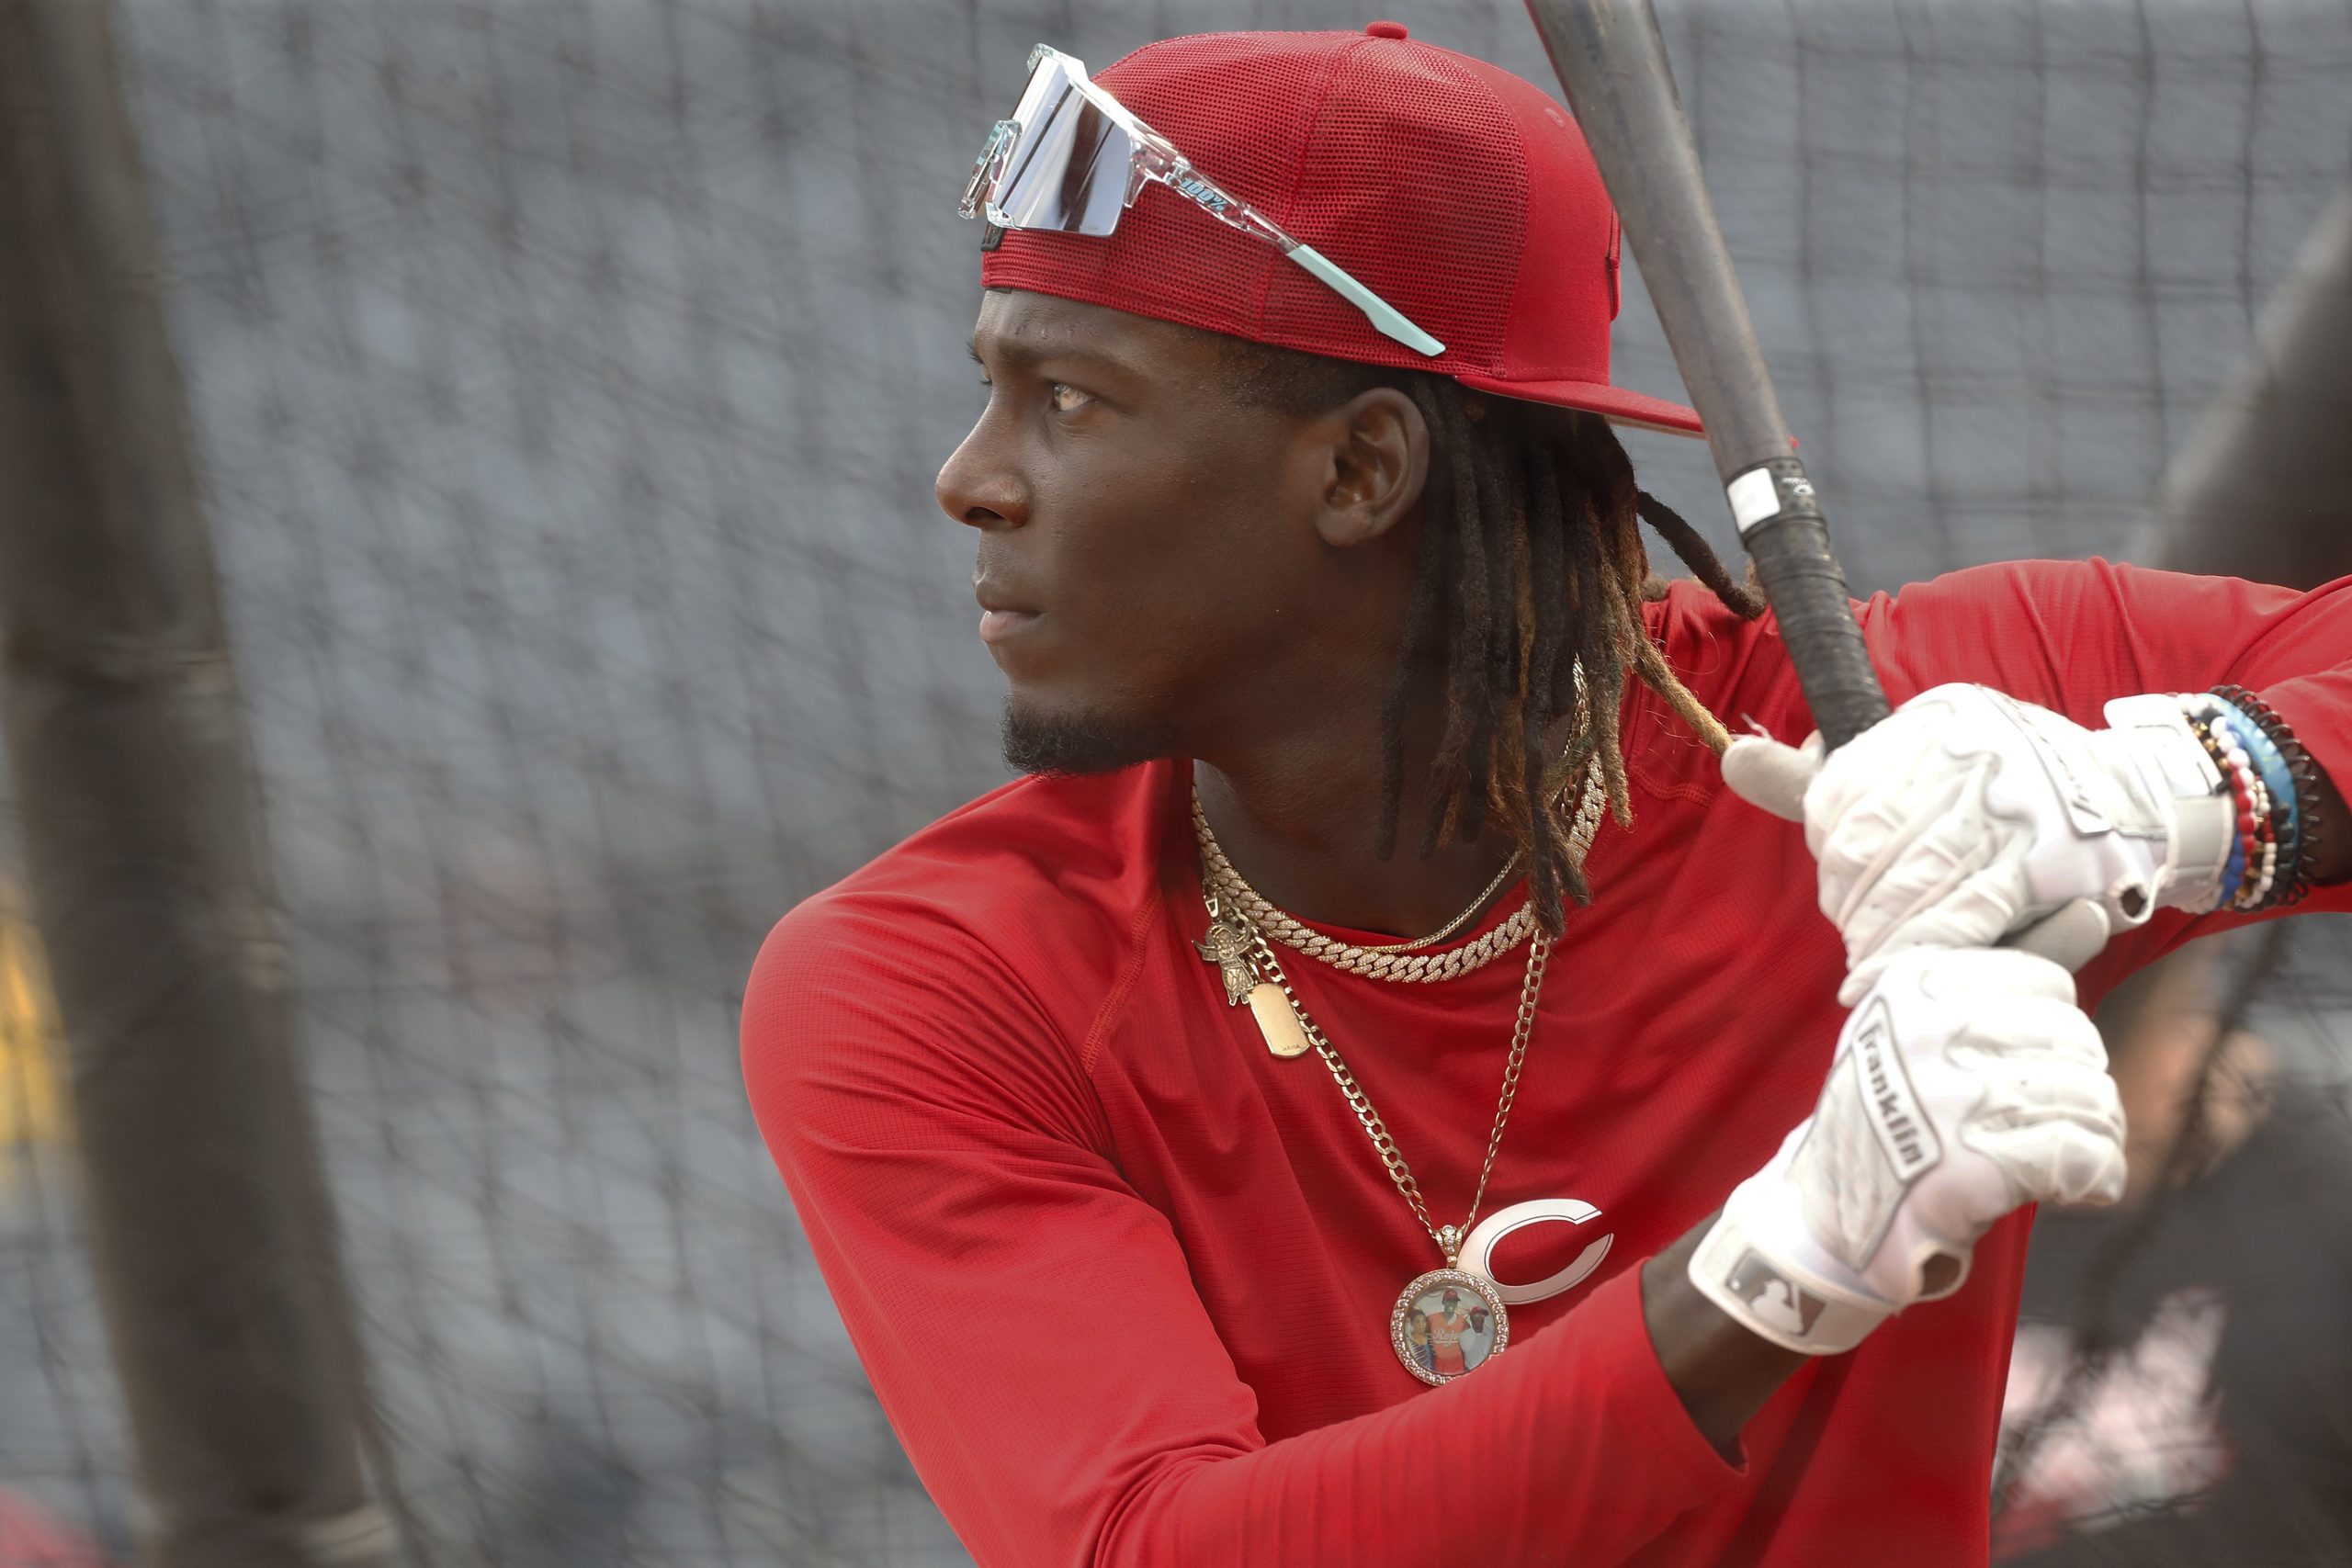 Jonathan India 'difference maker' again for Cincinnati Reds in NY